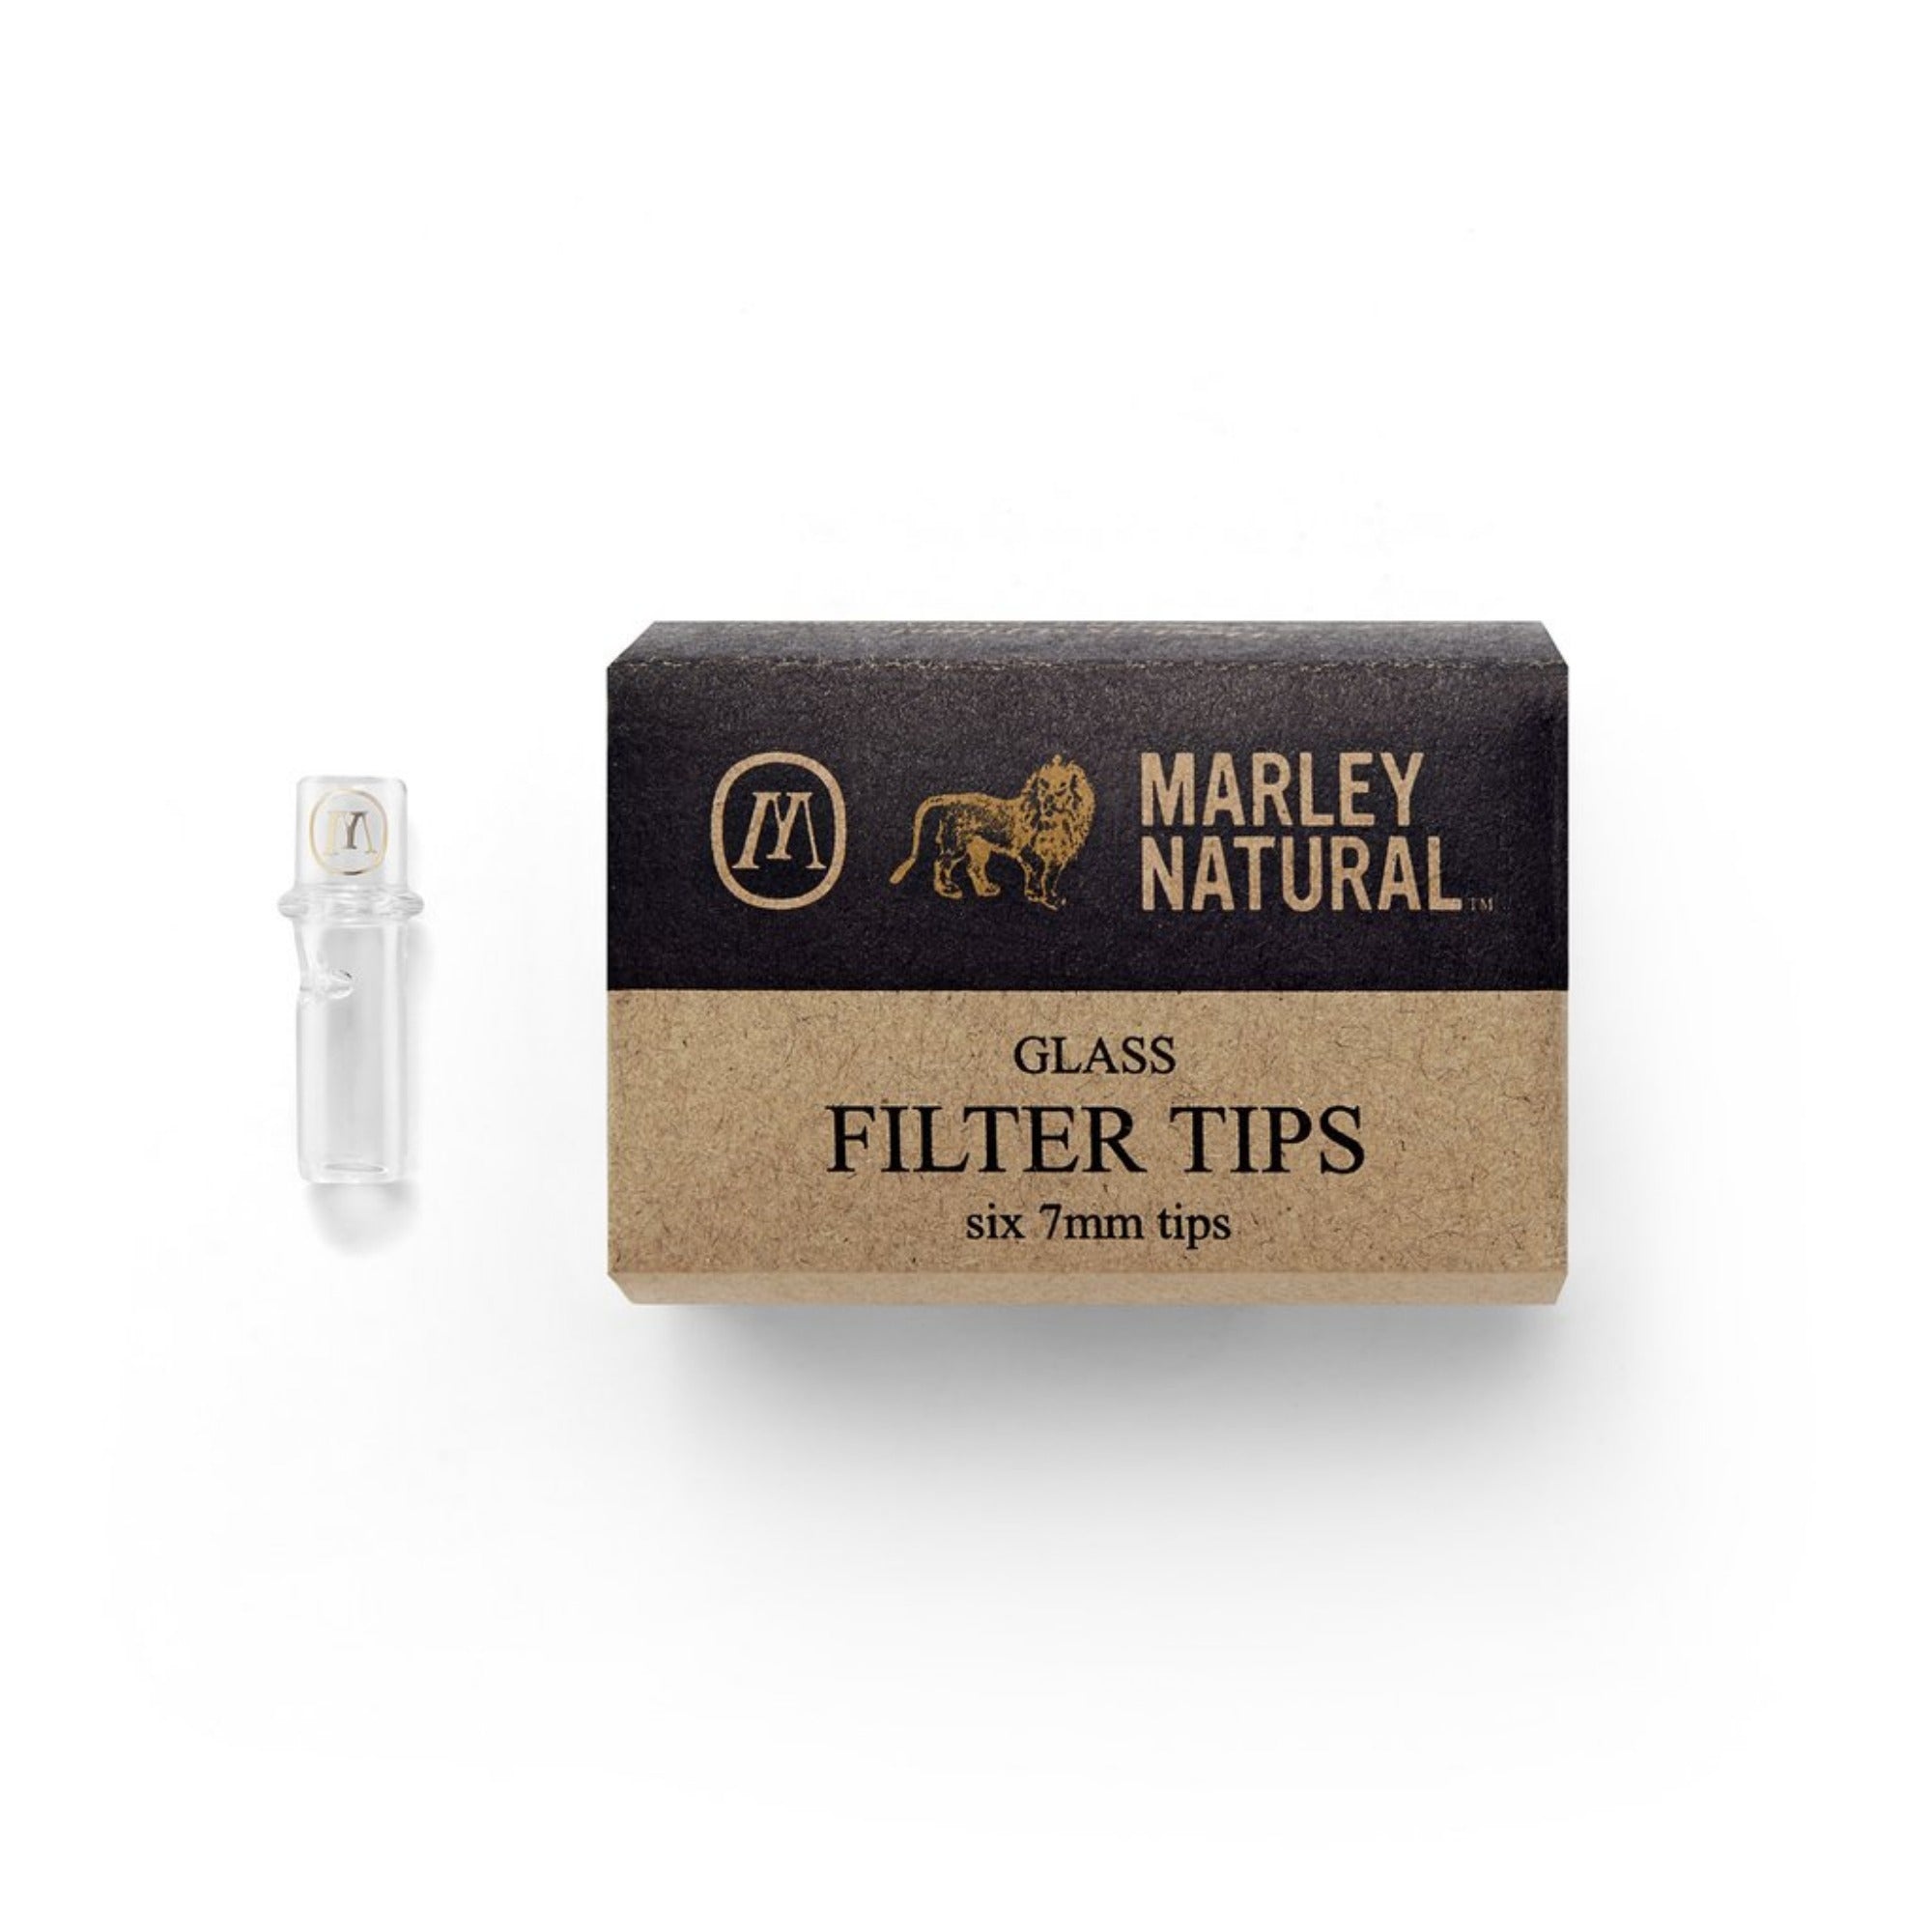 Marley Natural: 6 Pack of of 7mm glass filters